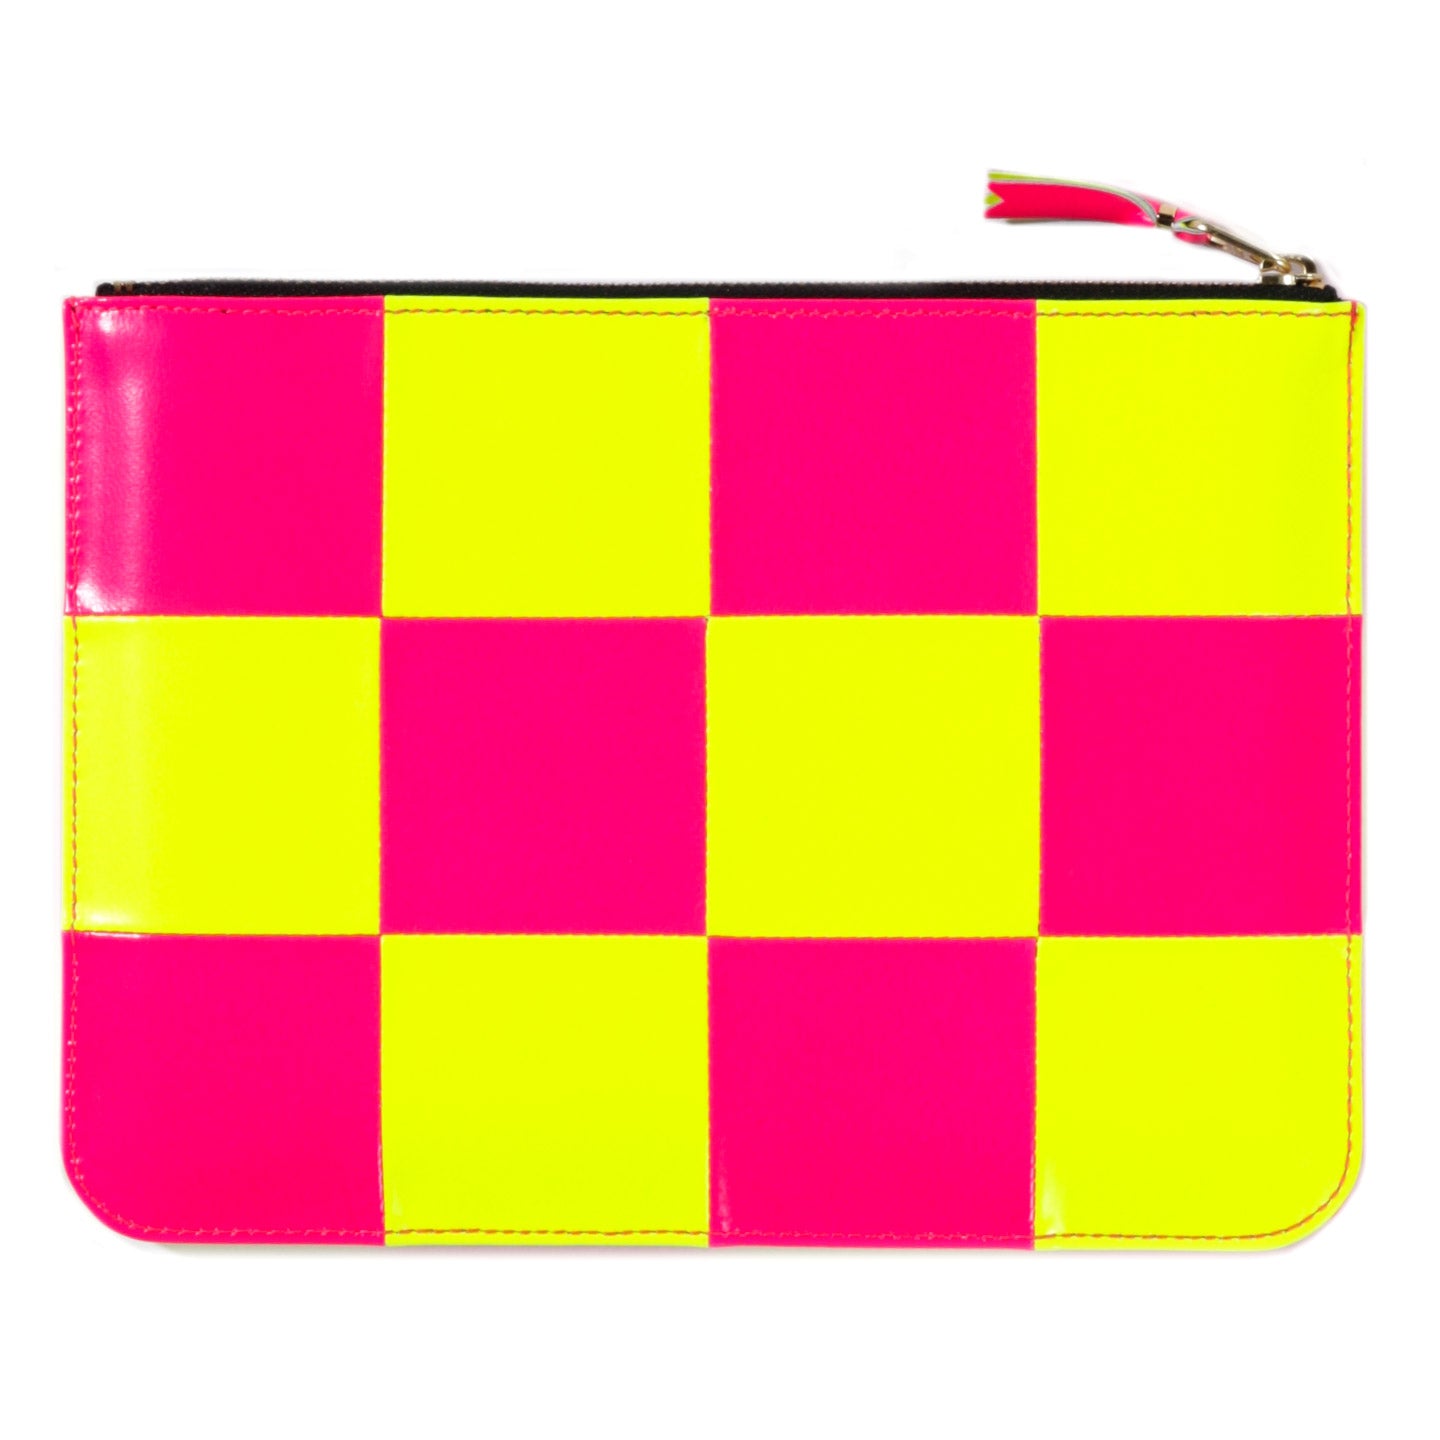 COMME DES GARCONS SA5100 FLUO SQUARES ZIP WALLET YELLOW / PINK